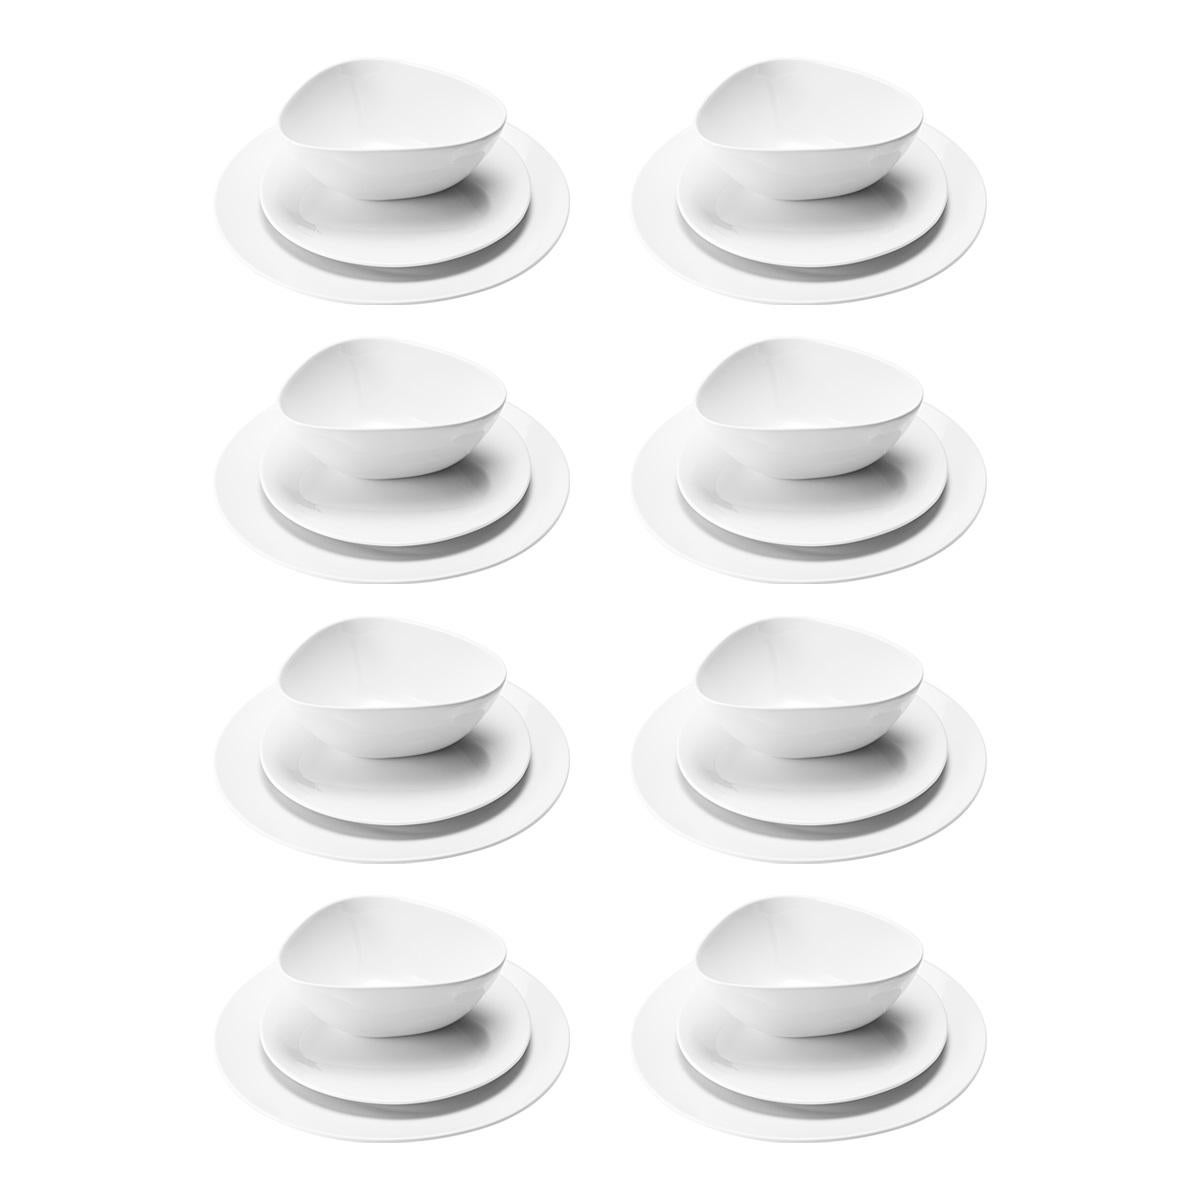 Minimalist, stylish and very Scandinavian, this white porcelain dinnerware set, comprising of a dinner and lunch plate and a bowl, is the perfect contemporary way of serving food. Echoing the distinctive asymmetric form that runs through the Sky